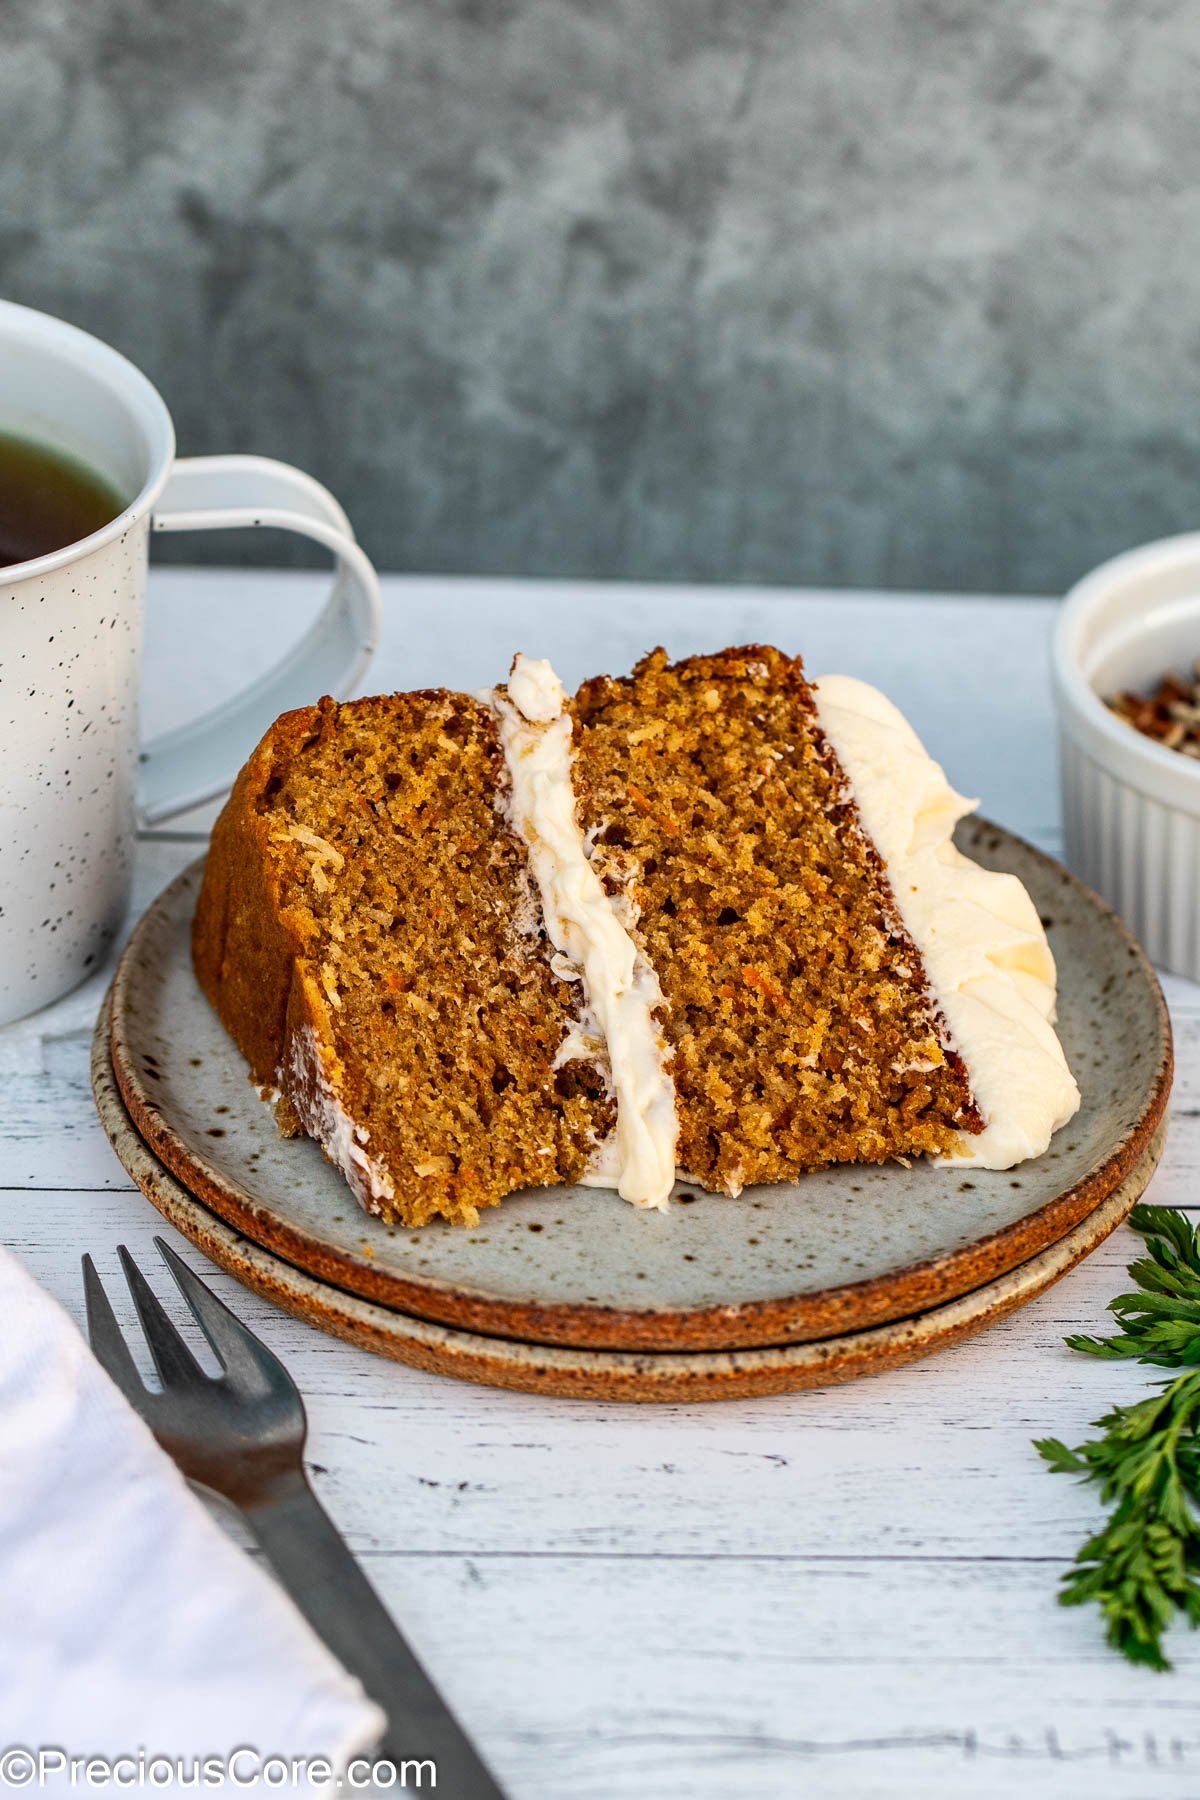 Slices of old fashioned carrot cake.